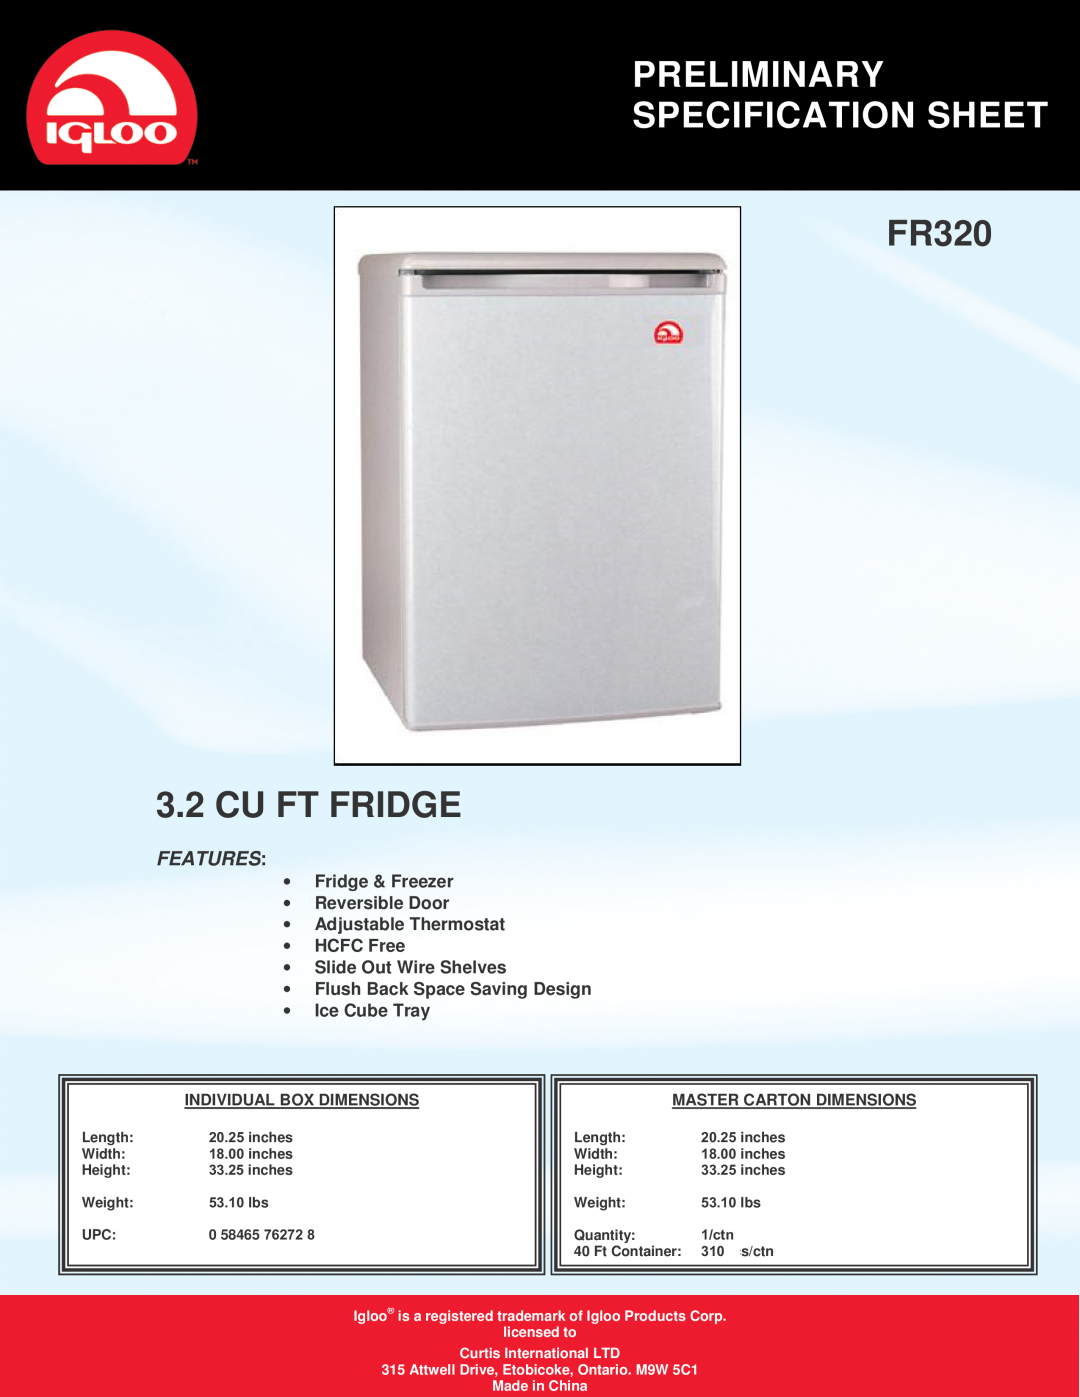 Curtis specifications Preliminary Specification Sheet, FR320 3.2 CU FT FRIDGE, Features, Slide Out Wire Shelves 